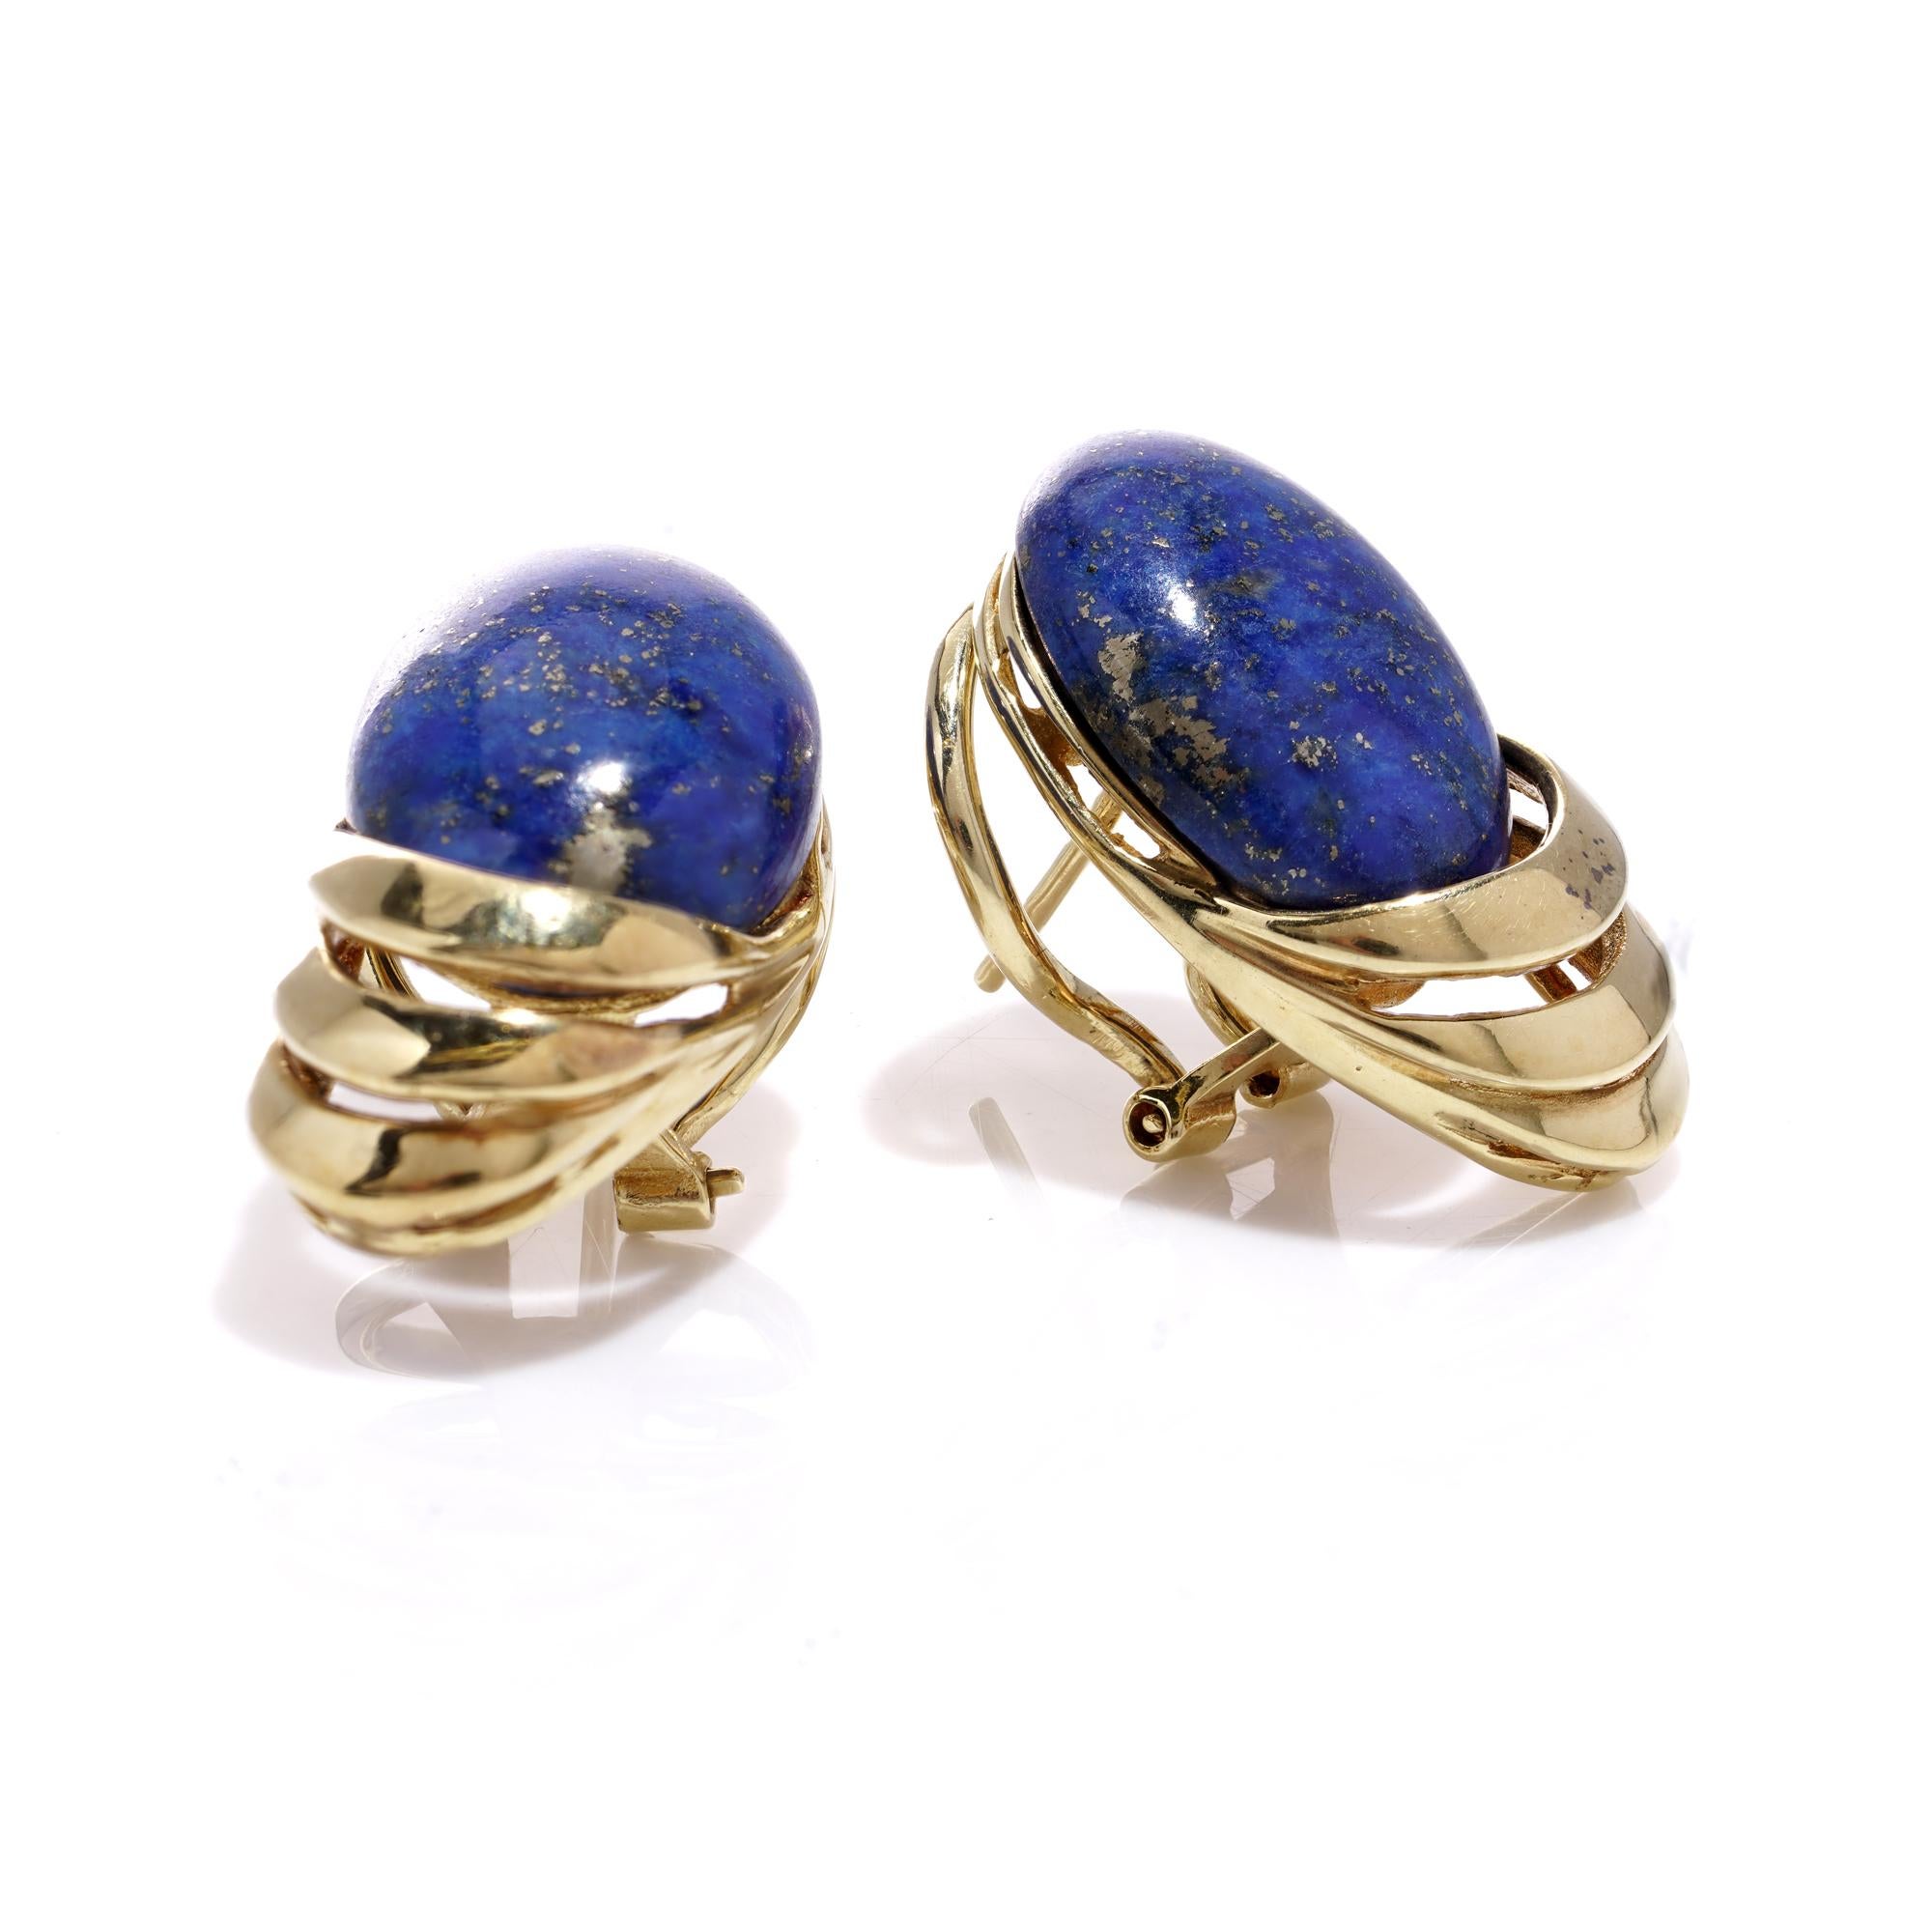  14kt Yellow Gold Clip-On Stud Earrings with Oval Cabochon Lapis Lazuli For Sale 2